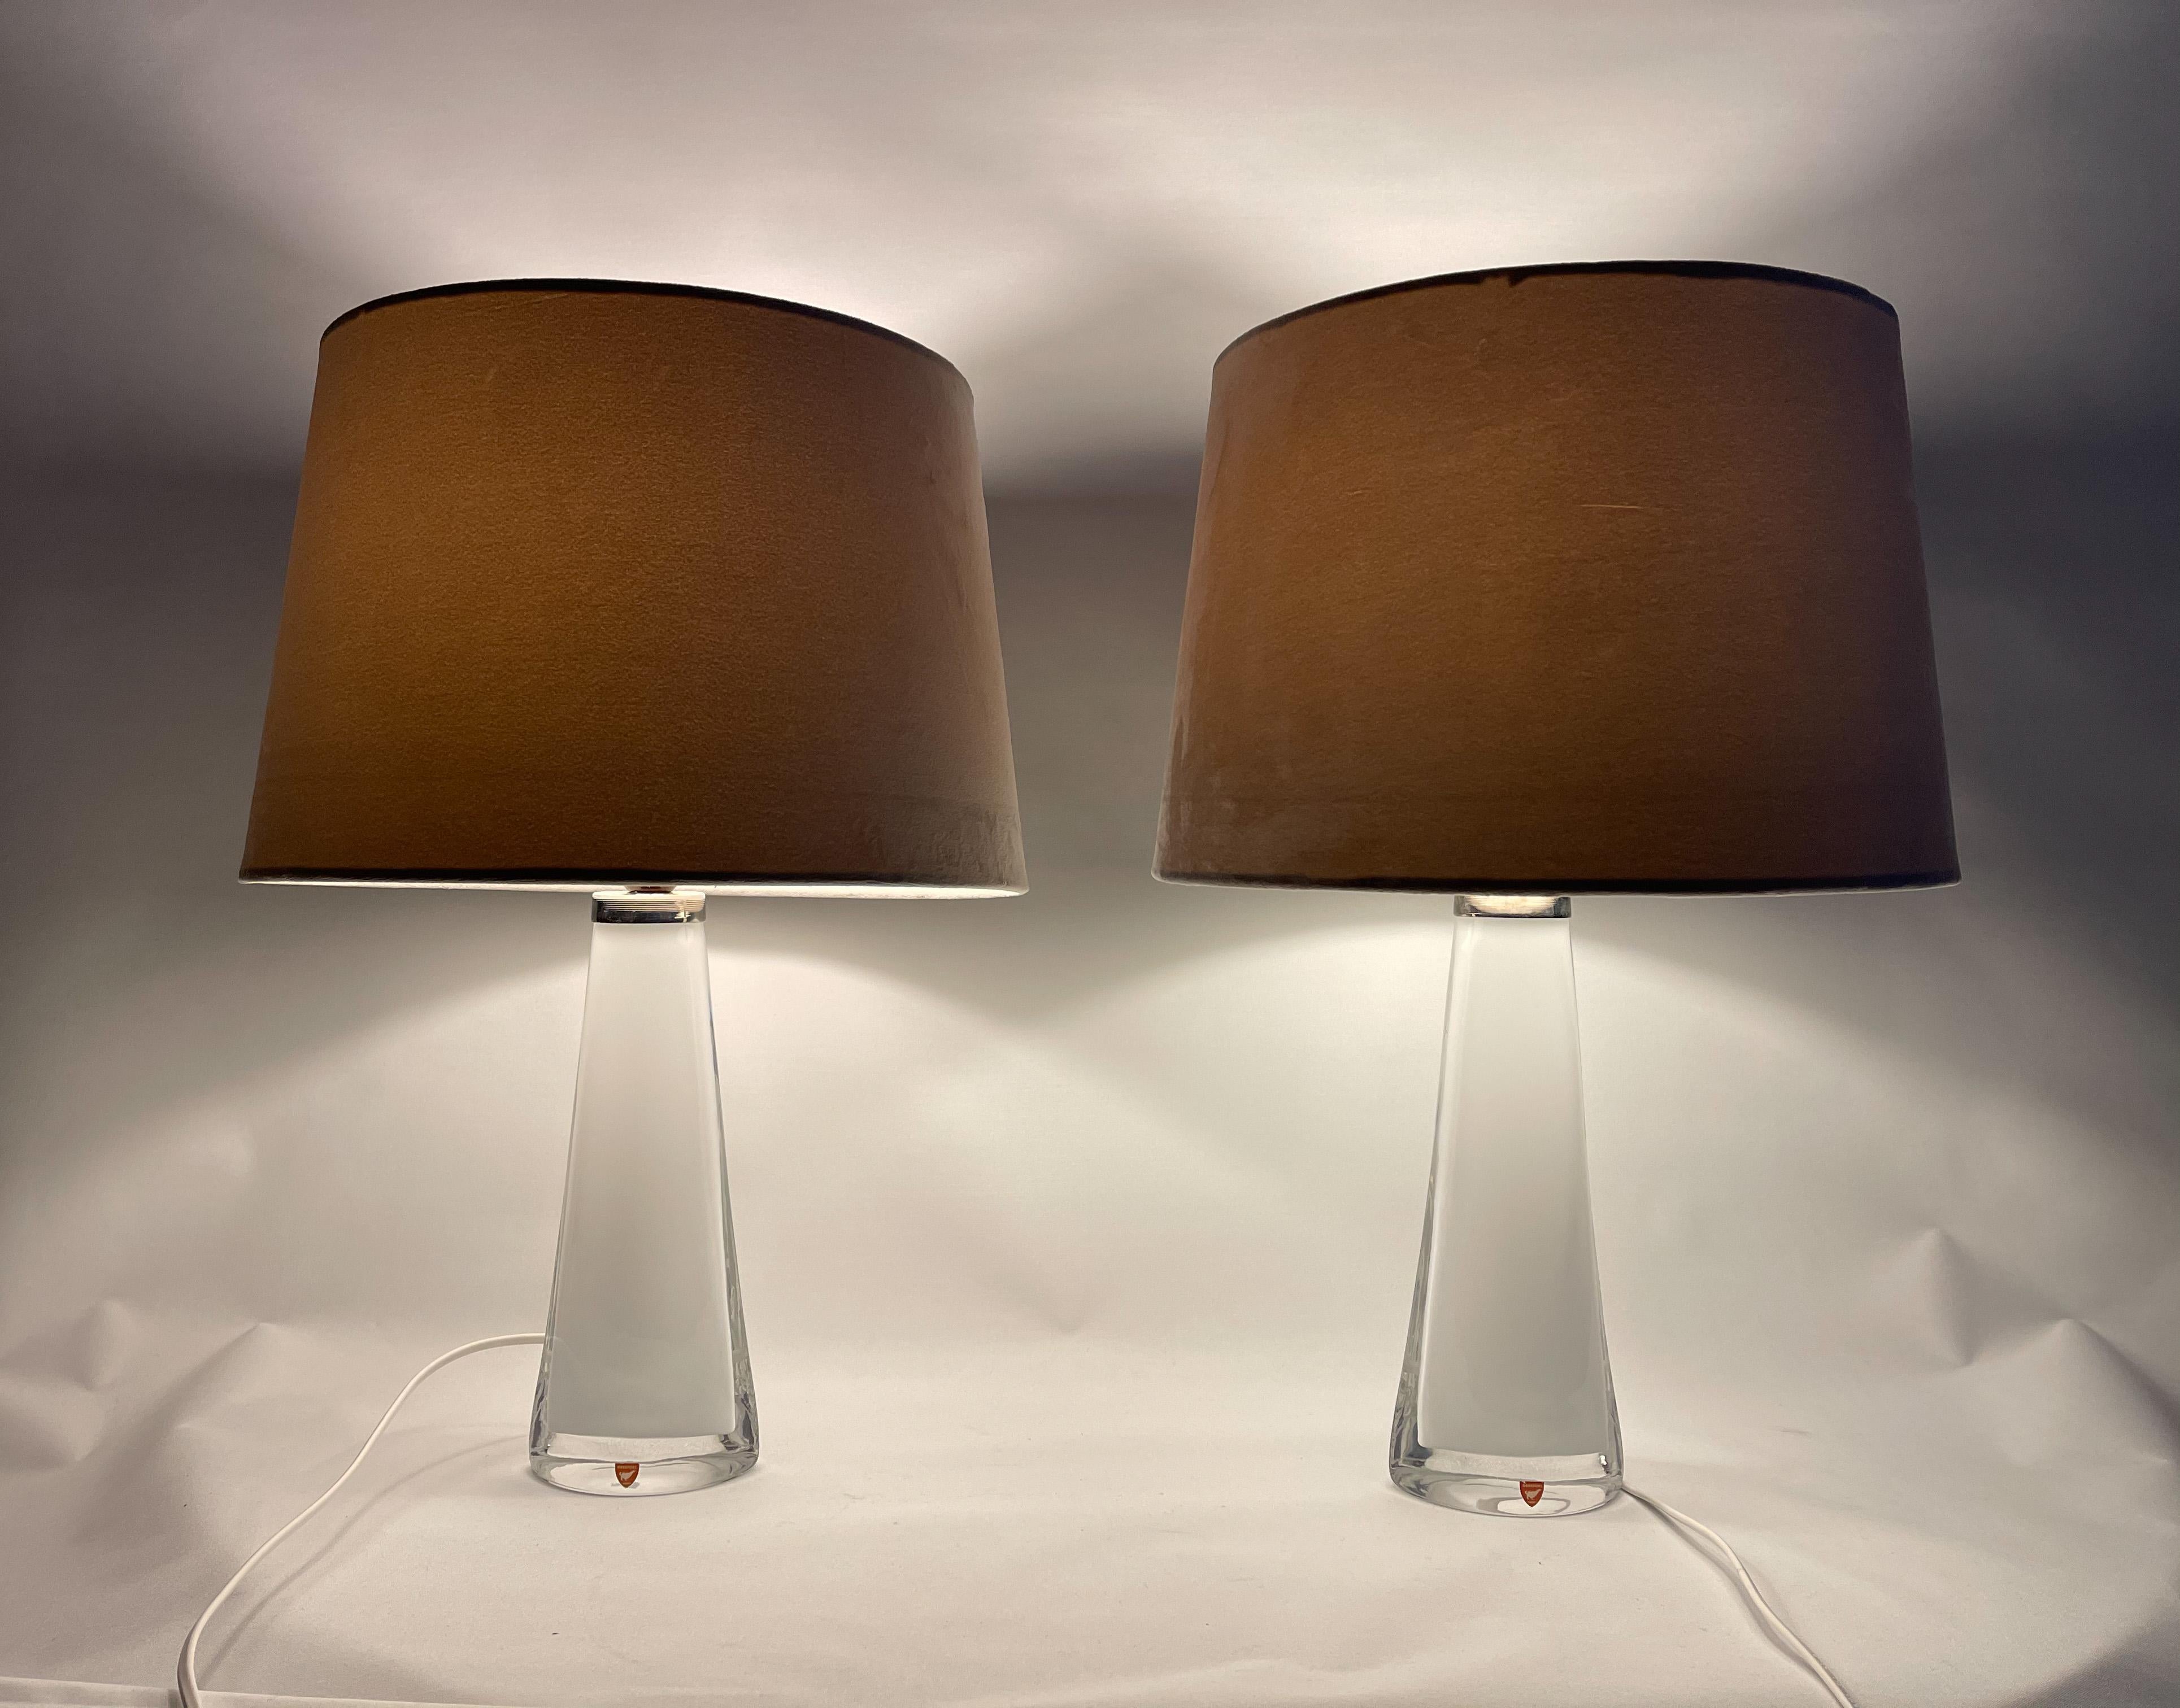 Table lamps in crystal, model RD 1566 by Carl Fagerlund for Orrefors, Sweden.
The lamps have a white color with clear glass, and chrome details.

Good working vintage condition, rewired.

The shade can be included if buyer wants. 

Measures: